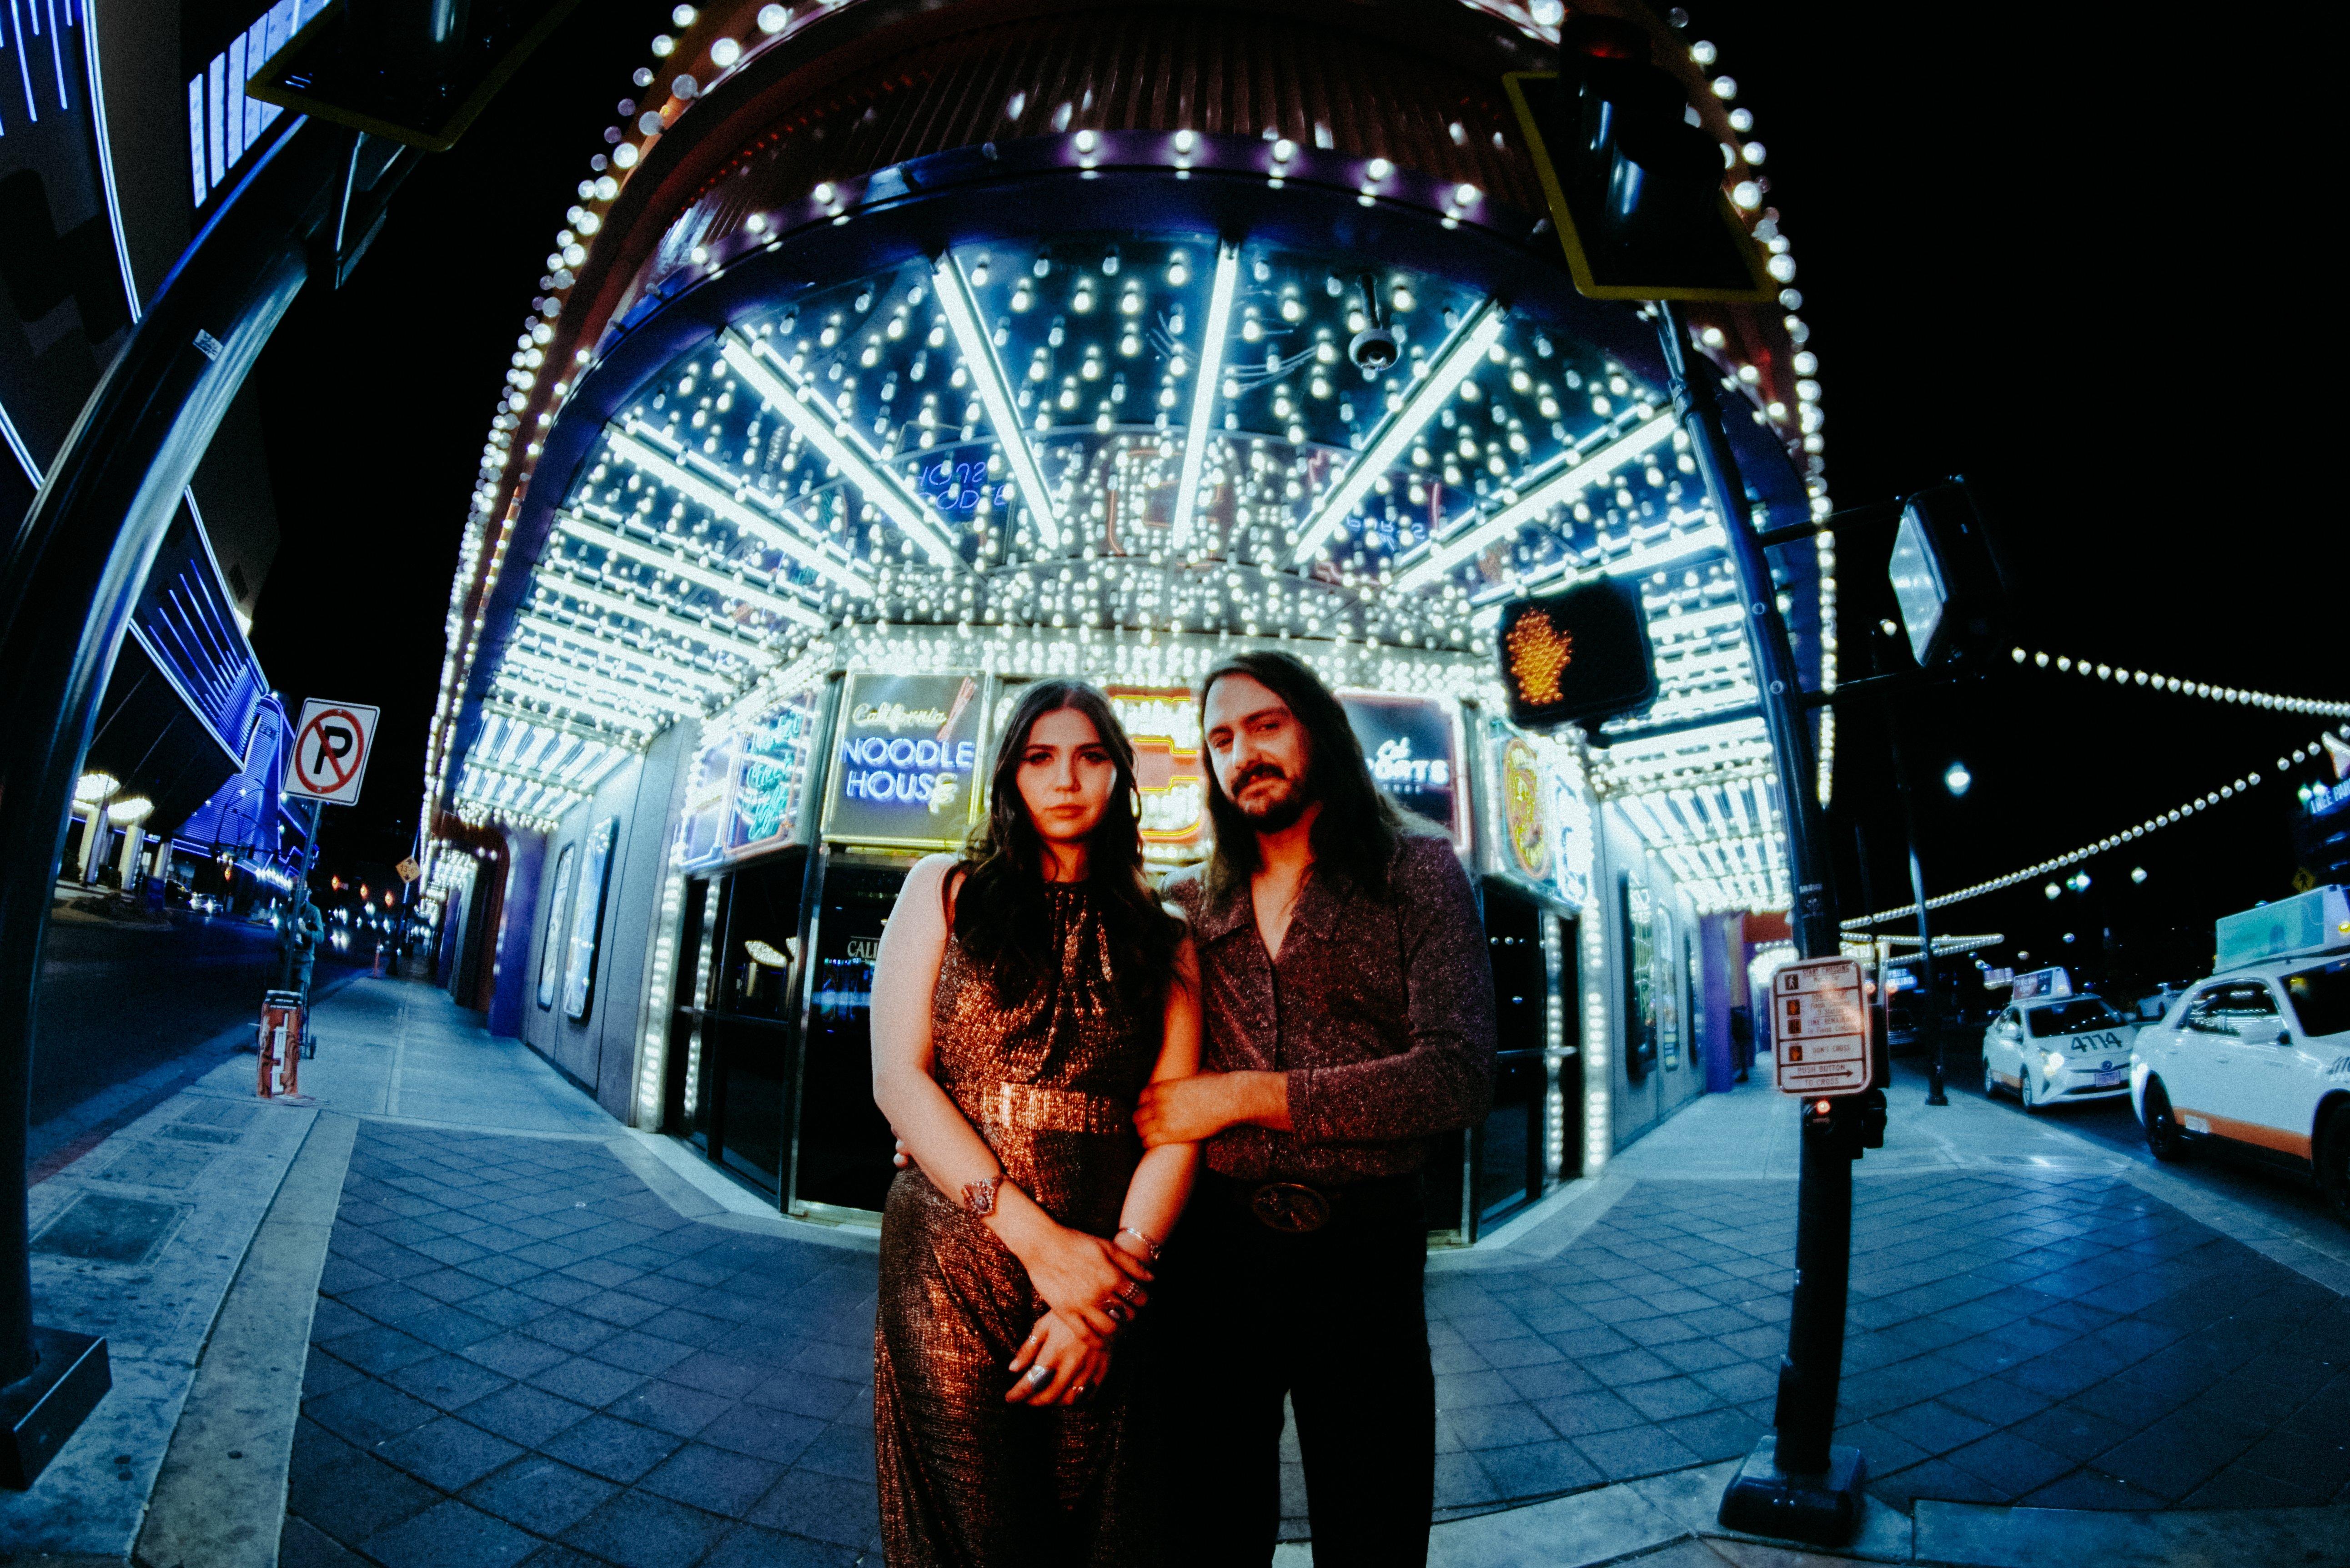 Photo Pearl Charles and Michael Rault in front of a venue